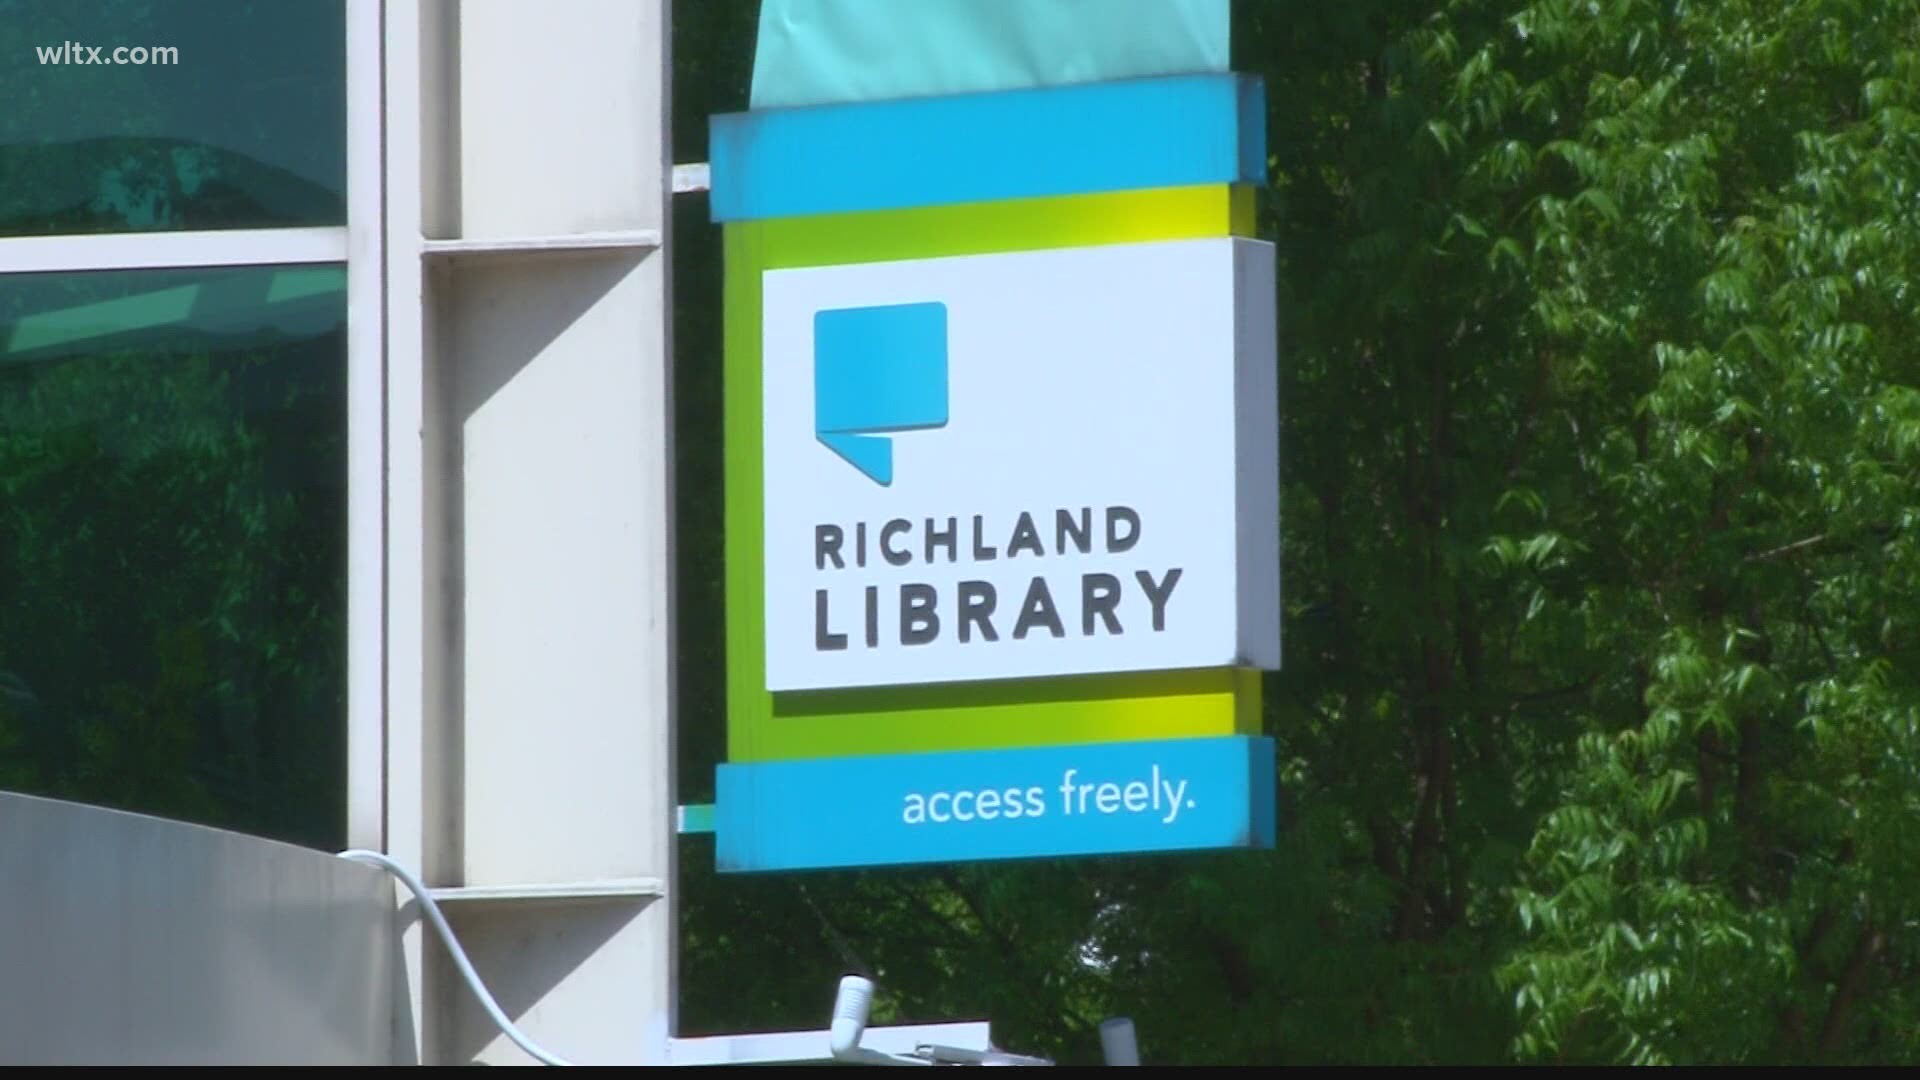 According to the library, those with a library card will have free access to equipment and kits to garden with.